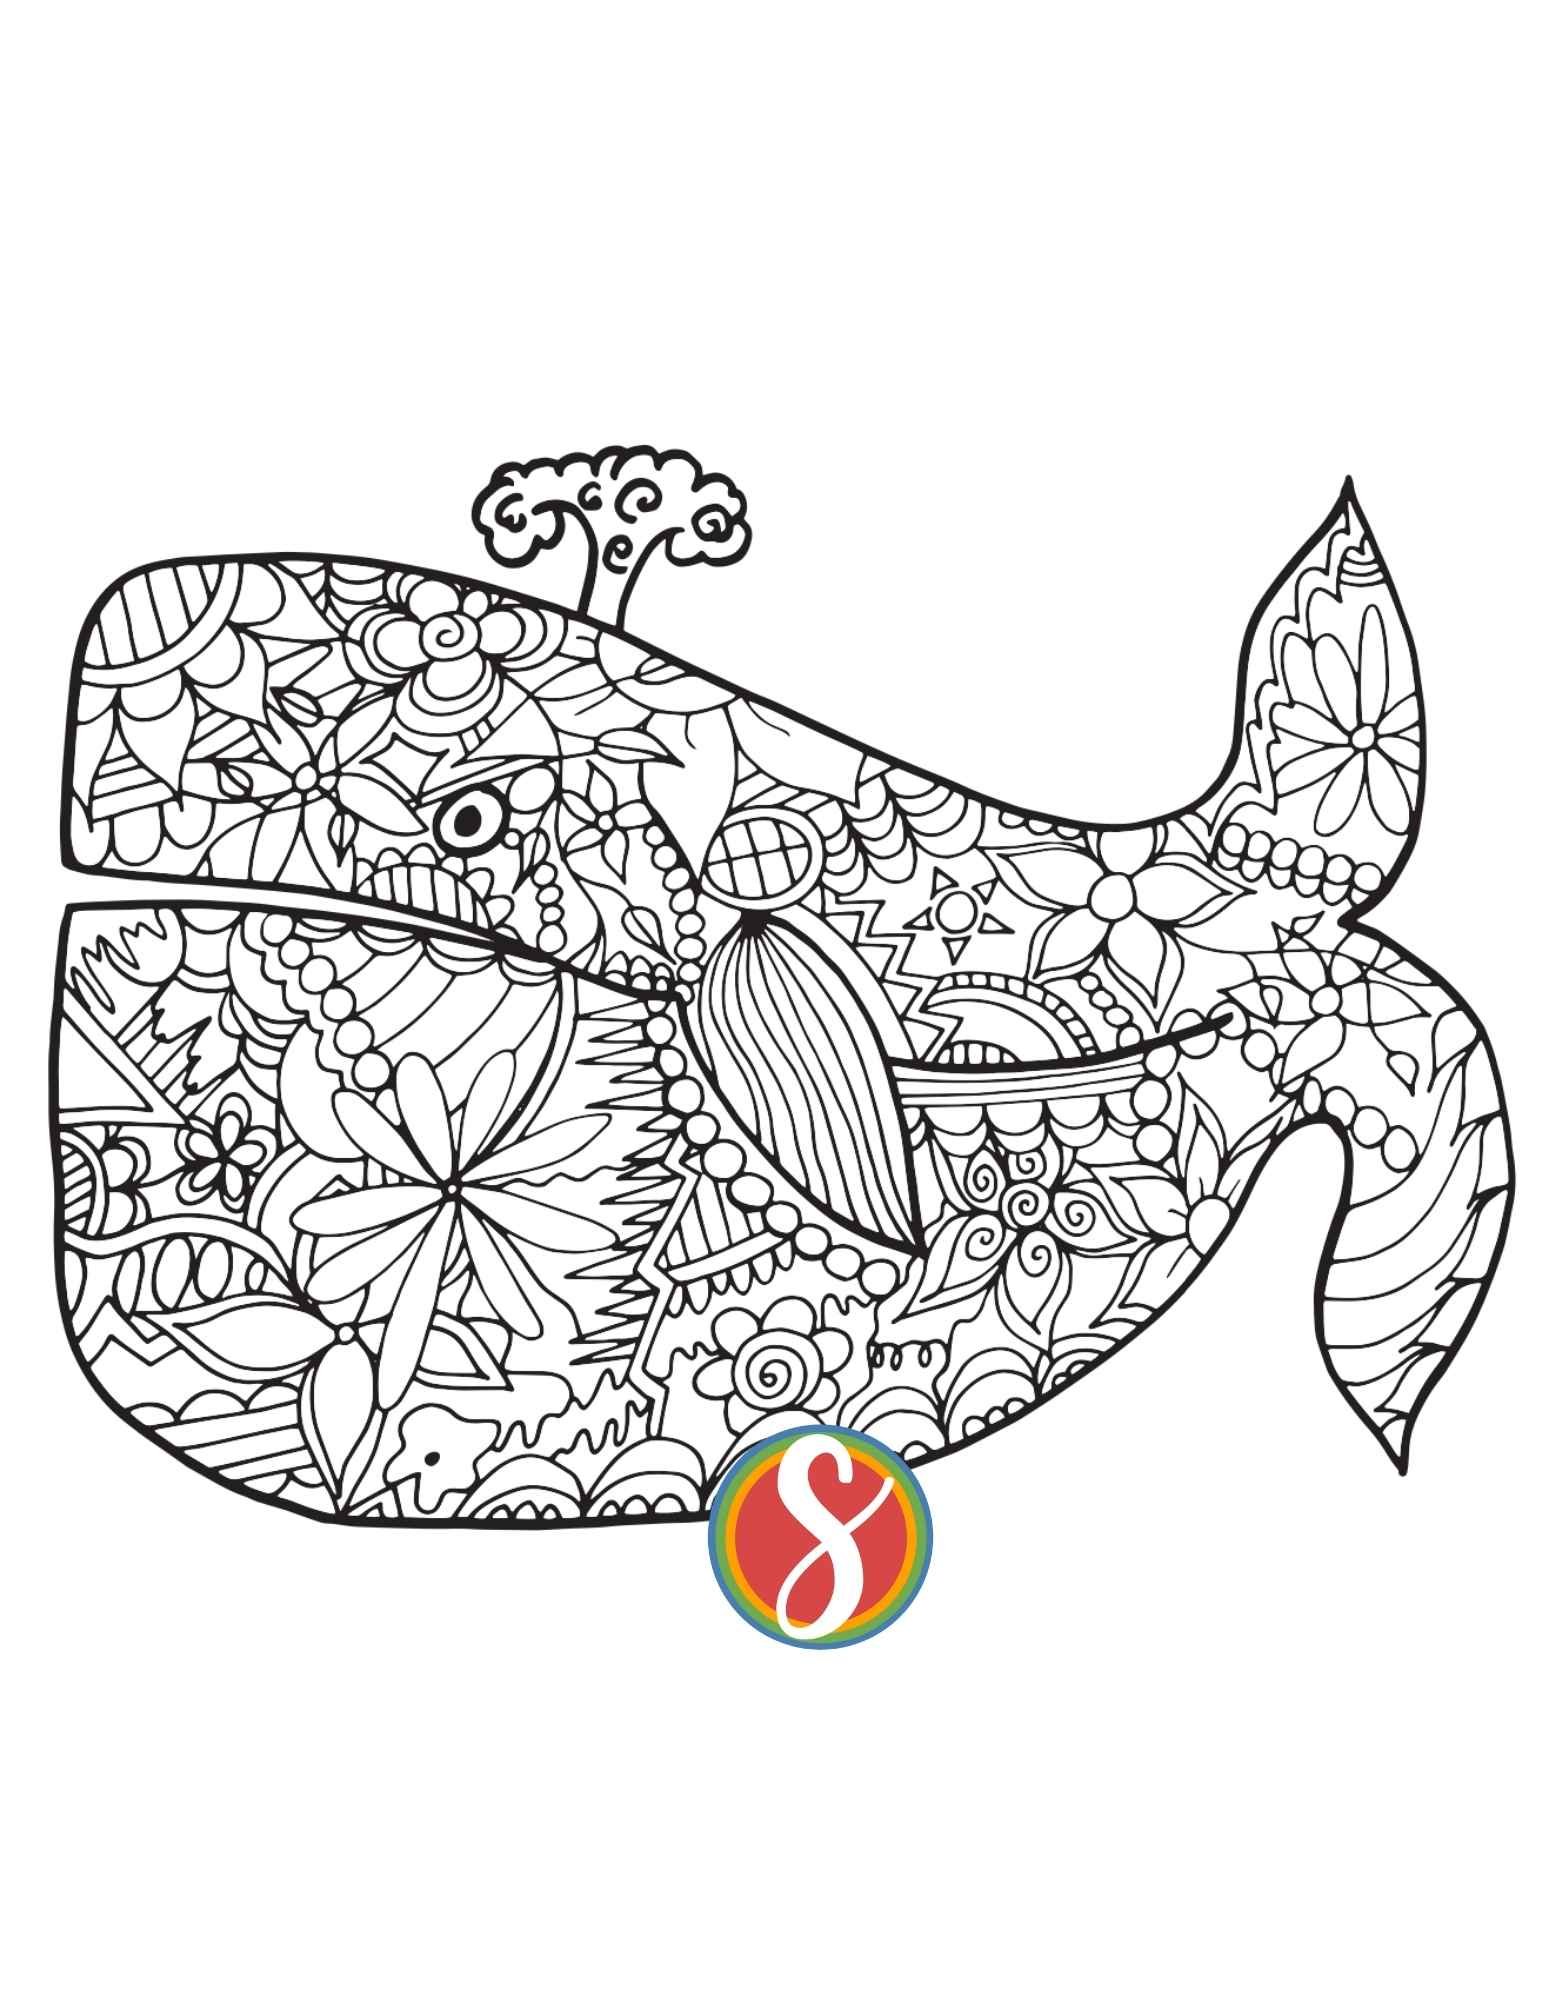 Blue whale coloring page with a bunch of doodles inside to color